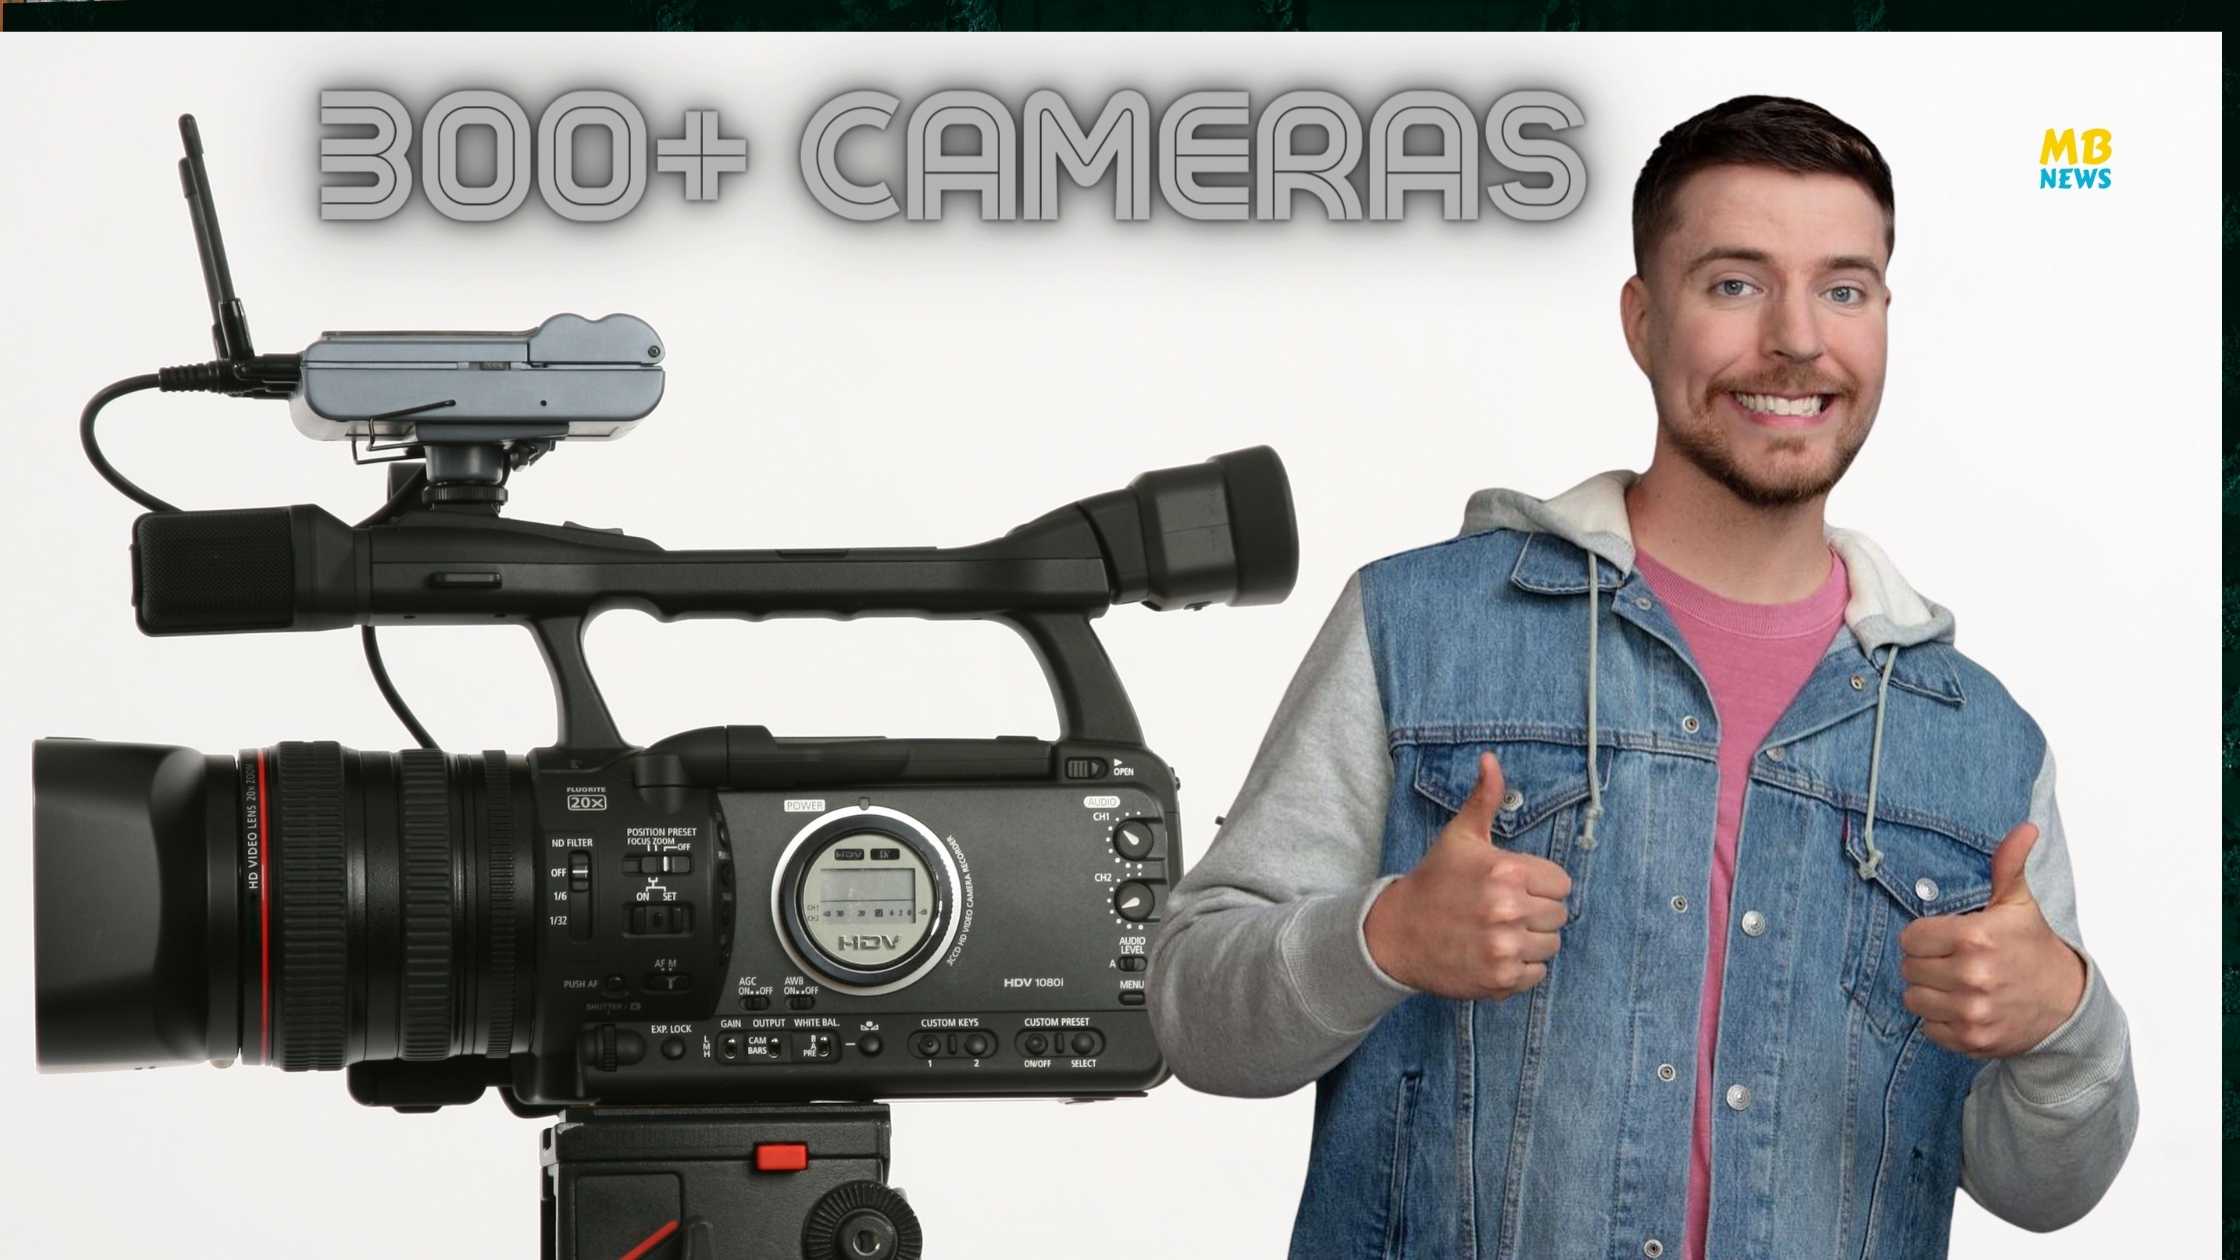 MrBeast's Record-Breaking Video Project A Closer Look at the 300+ Camera Setup